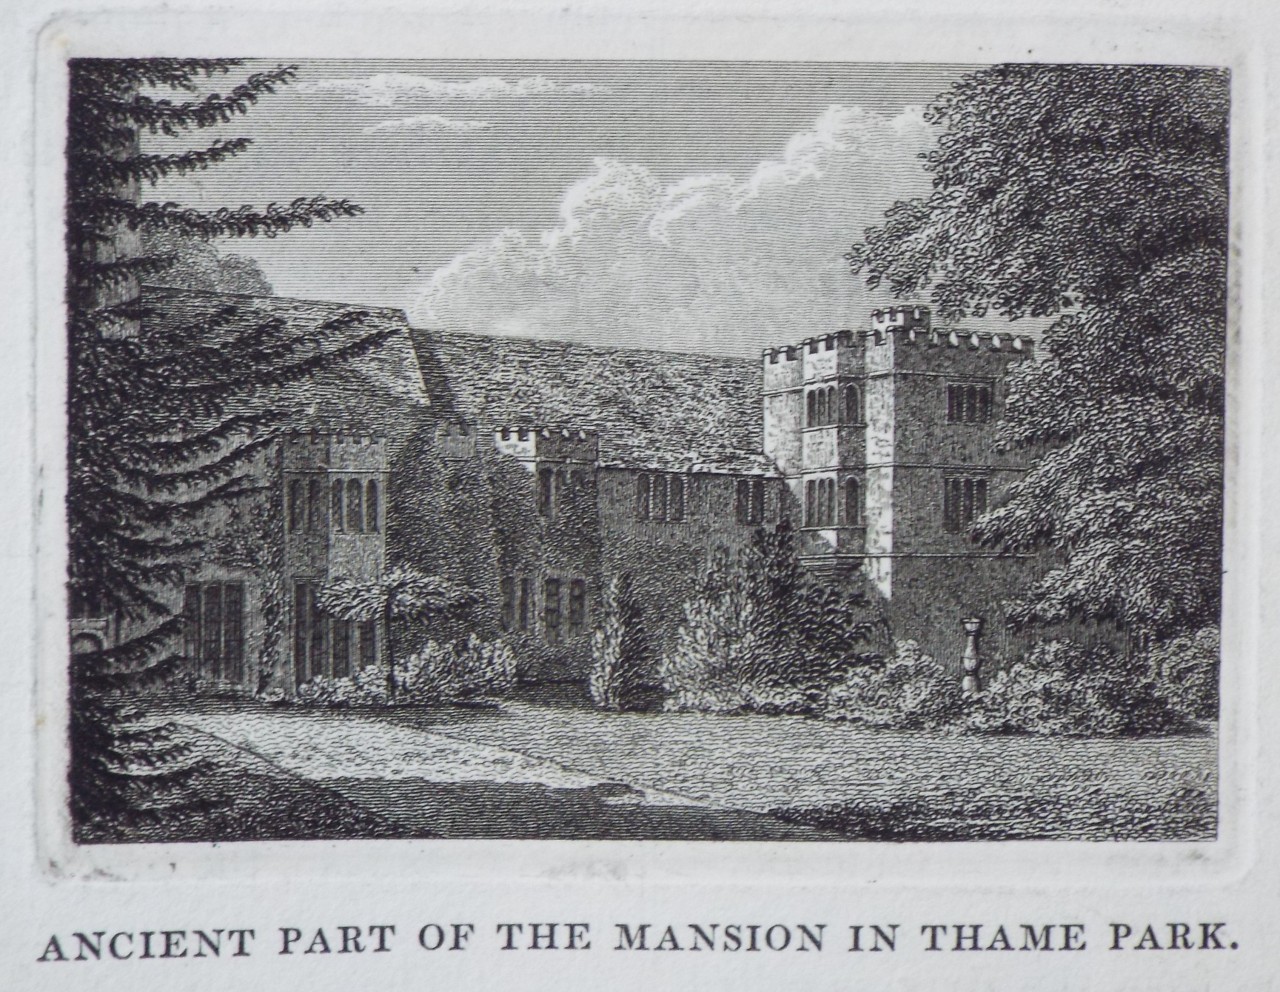 Print - Ancient part of the Mansion in Thame Park.